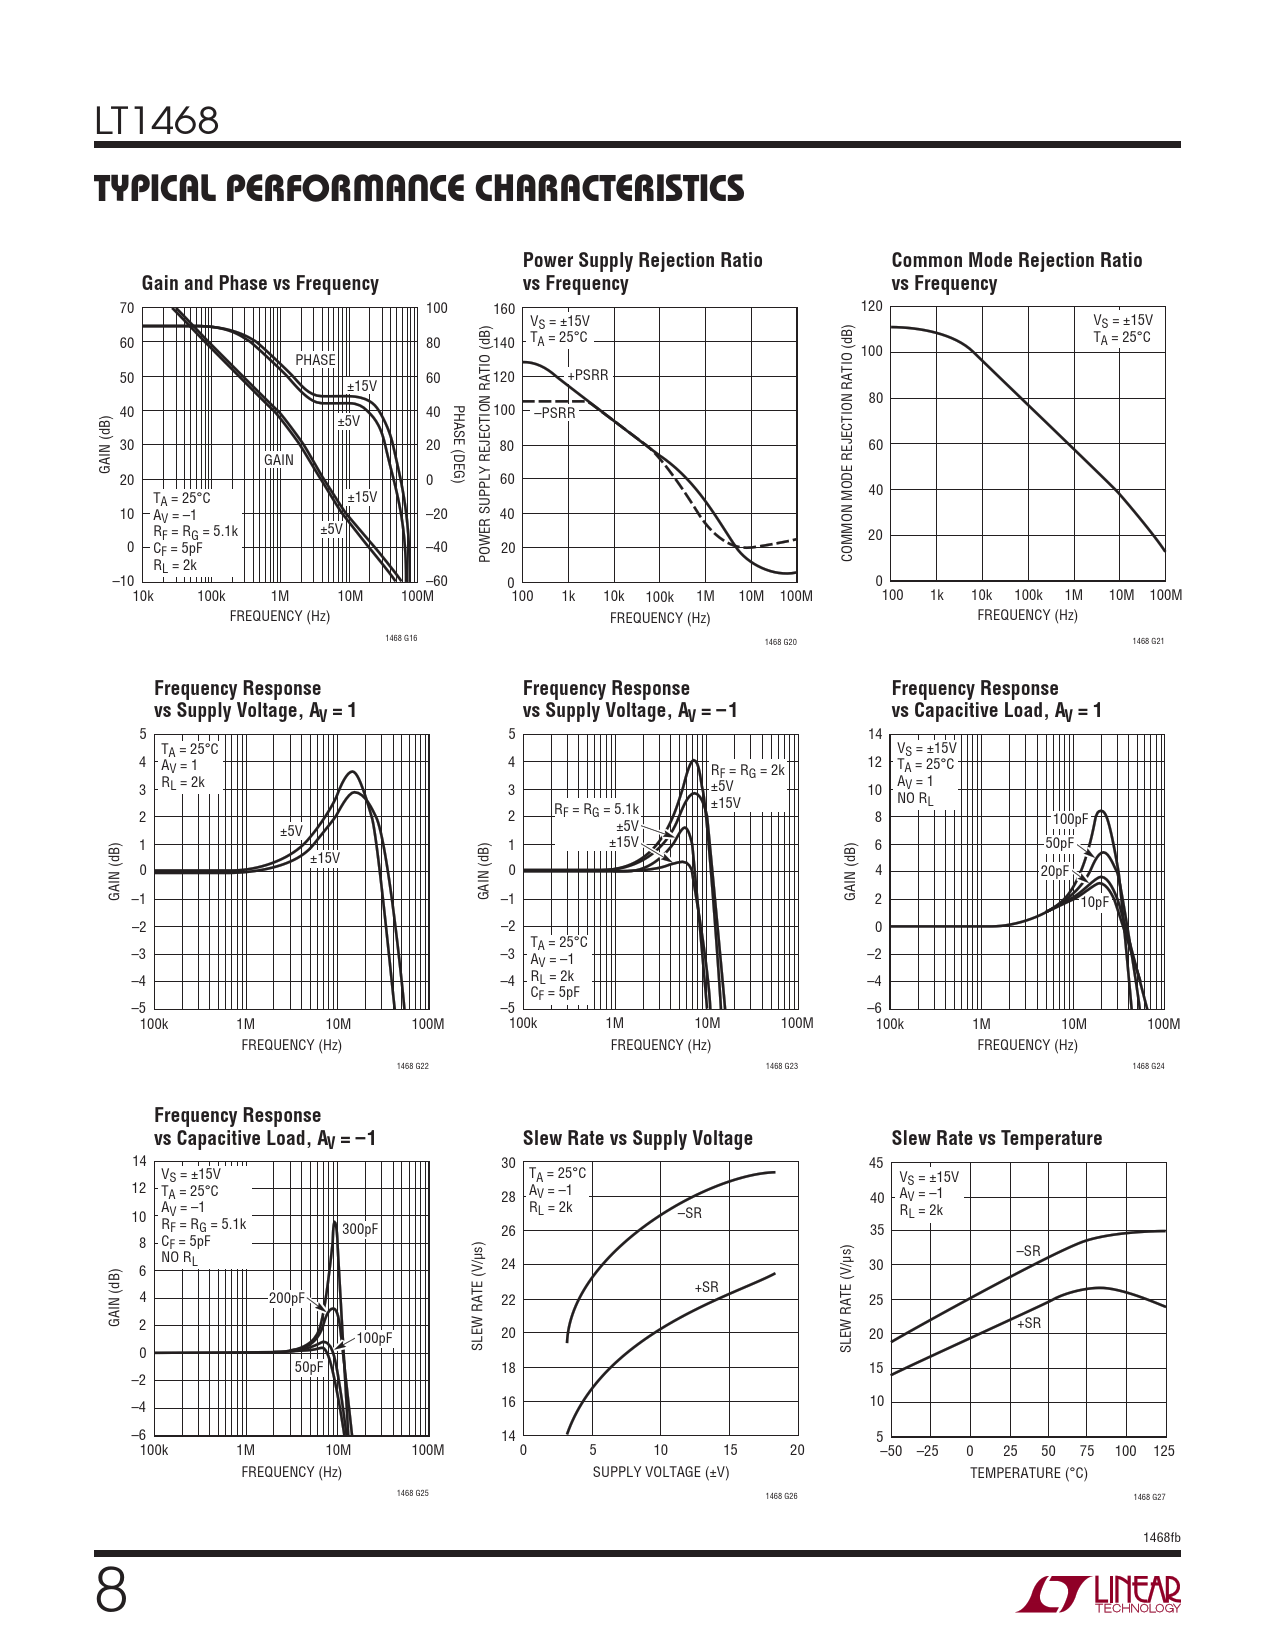 TYPICAL PERFORMANCE CHARACTERISTICS Power Supply Rejection Ratio Common Mode Rejection Ratio Gain and Phase vs Frequency